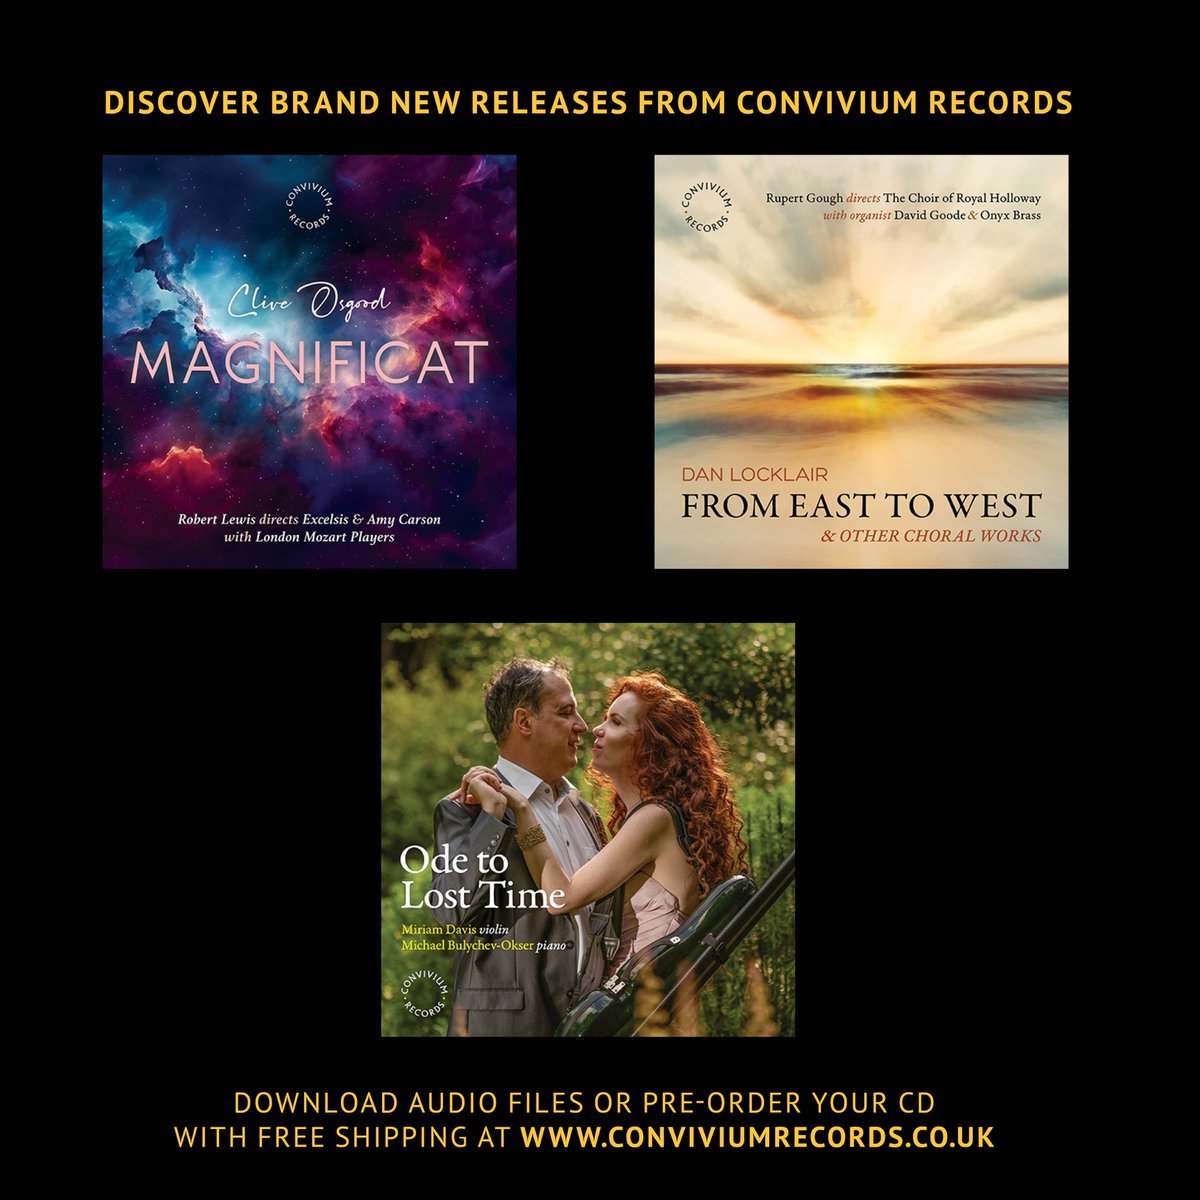 OUT NOW! Discover brand new releases from Convivium Records 👉 @Clive_Osgood Magnificat conviviumrecords.co.uk/product/clive-… 👉 From East To West - sacred music by Dan Locklair conviviumrecords.co.uk/product/dan-lo… 👉 Ode To Lost Time - French music for violin & piano conviviumrecords.co.uk/product/ode-to…